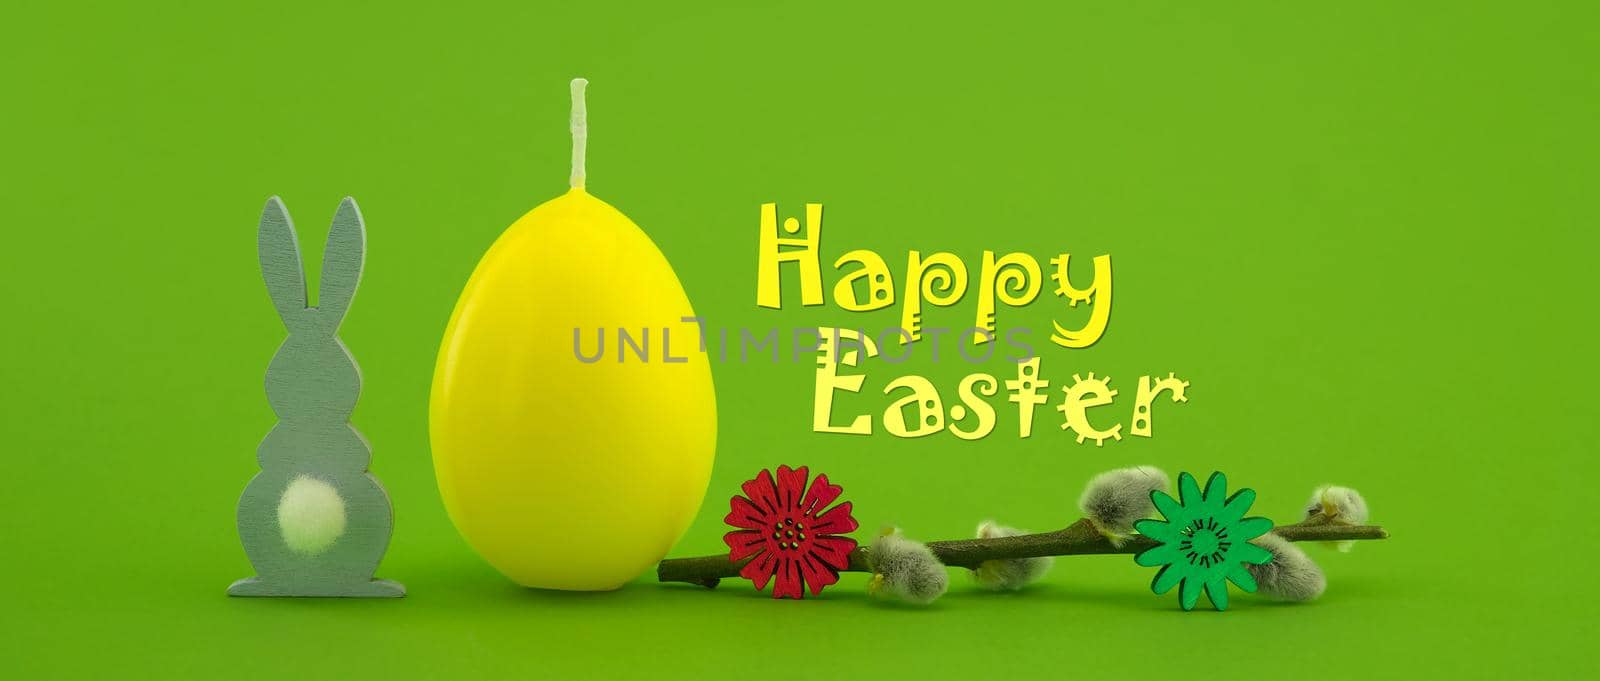 Easter holiday banner with yellow shaped candle by NetPix